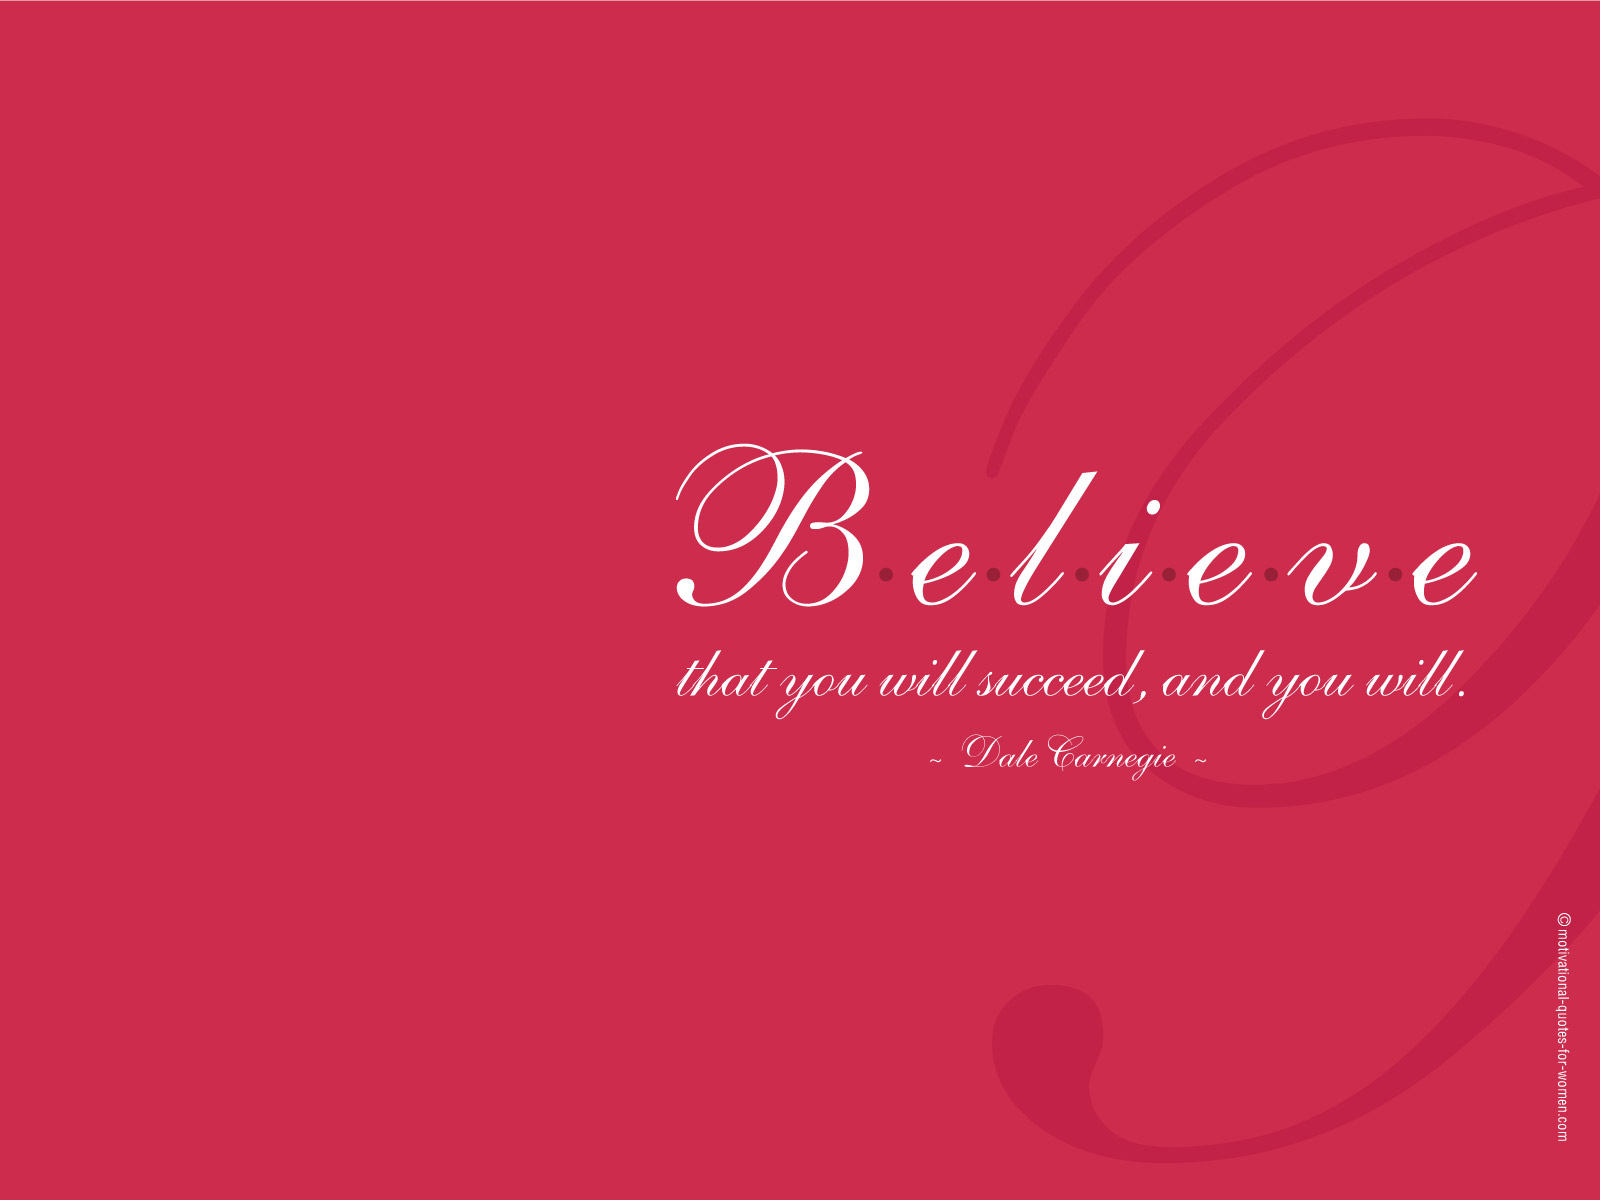 Inspirational Believe Quotes Wallpaper 3197 Inspiration   bwalles 1600x1200